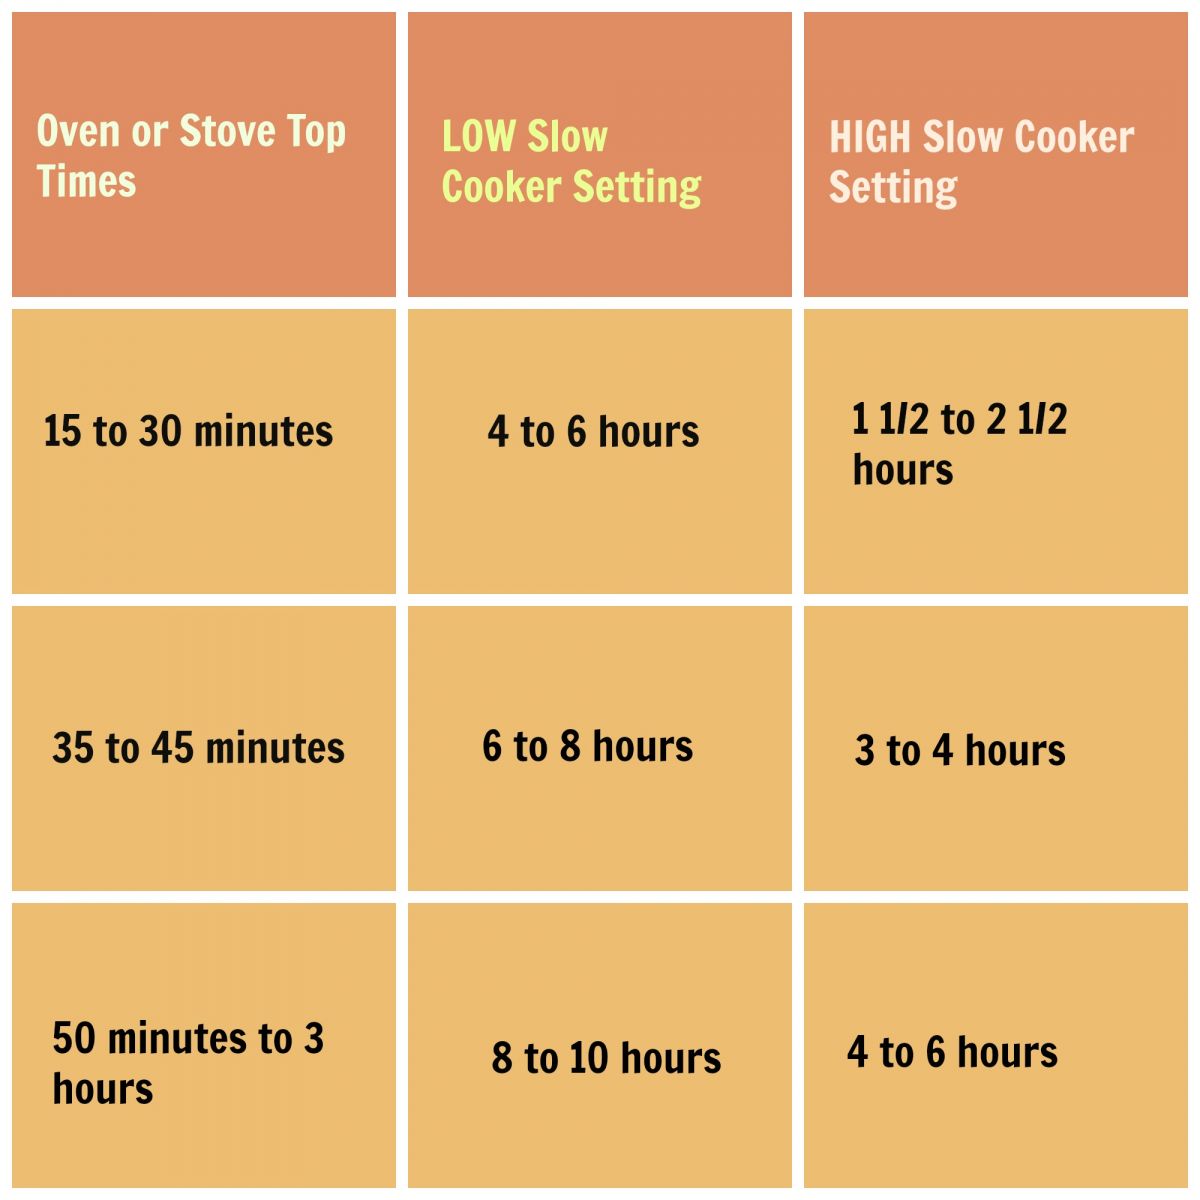 Tips for Converting Slow Cooker Recipes